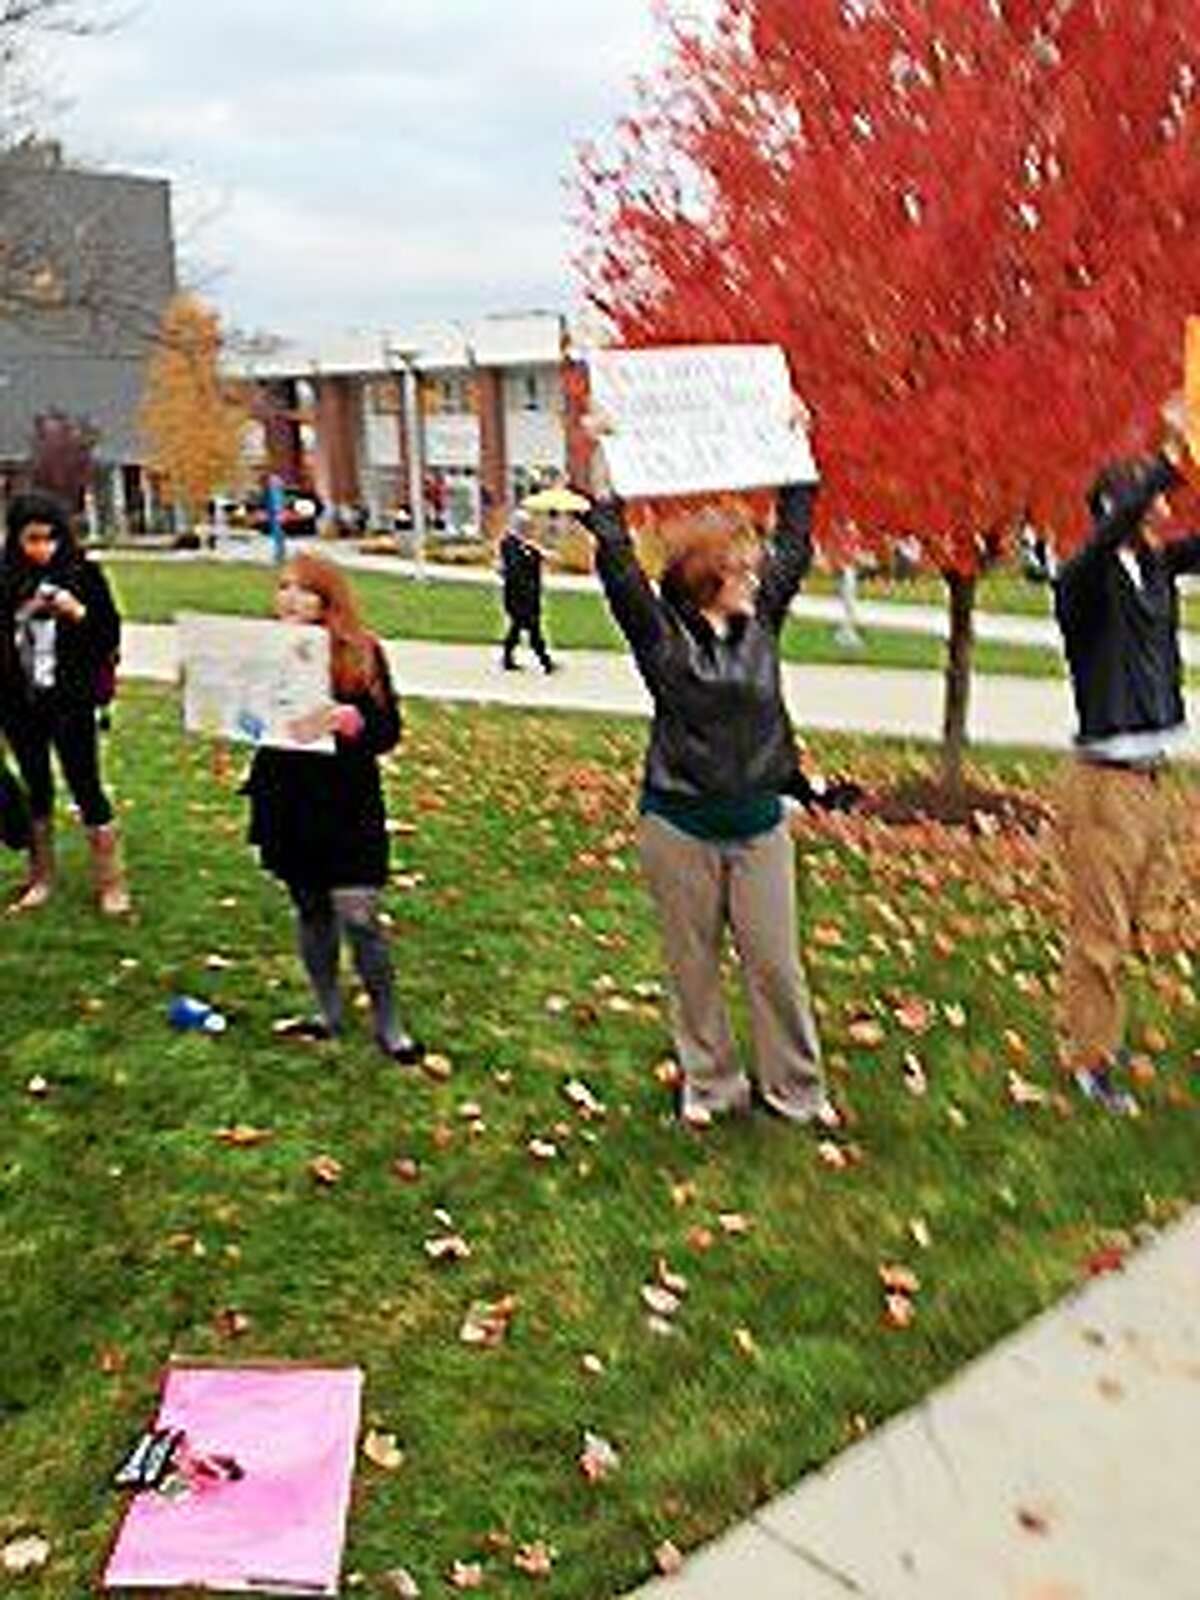 Students at the University of New Haven protest the proposed phase-out of the graduate teacher education program Wednesday.